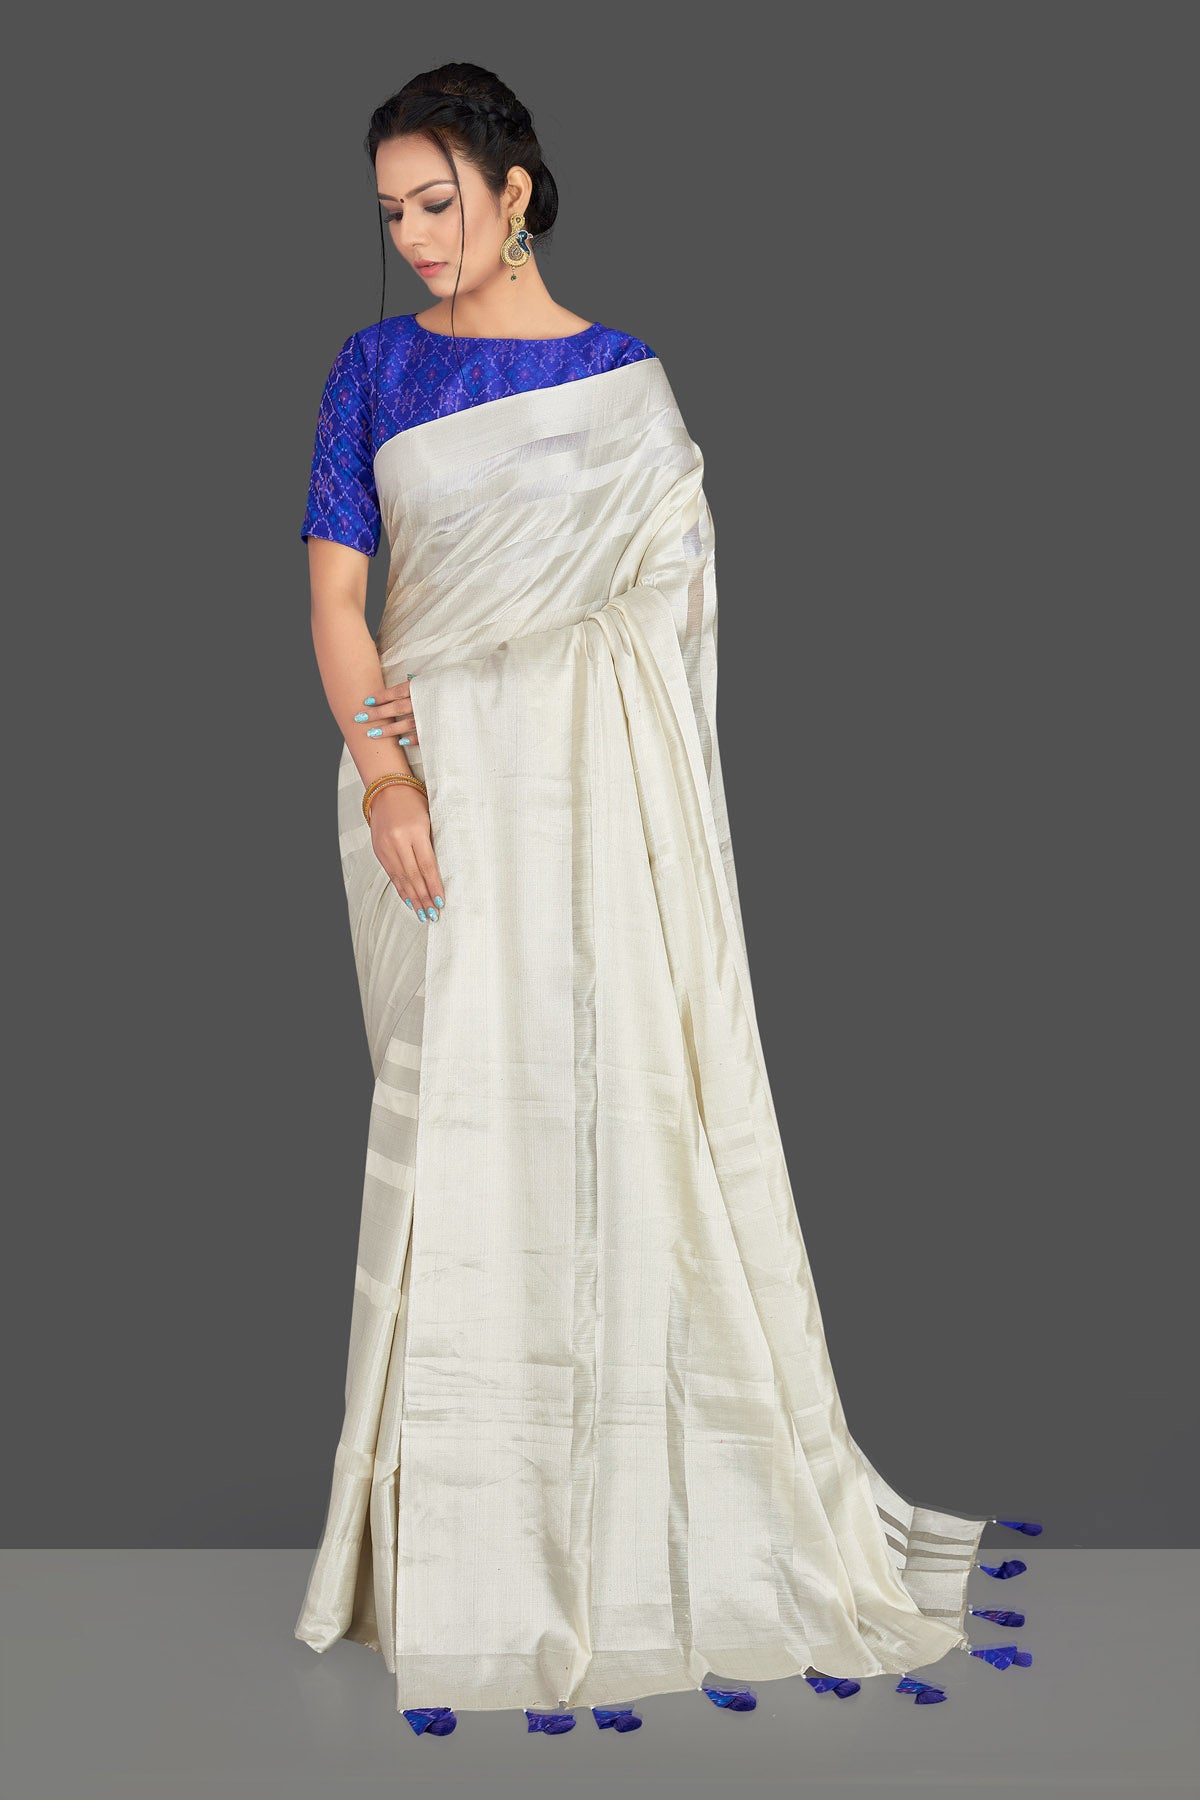 Buy lovely off-white tassar silk sari online in USA with blue patola ikkat saree blouse. Make your ethnic wardrobe rich with timeless handwoven sarees, tissue sarees, silk sarees, tussar saris from Pure Elegance Indian clothing store in USA. Find all the designer sarees for special occasions under one roof!-front